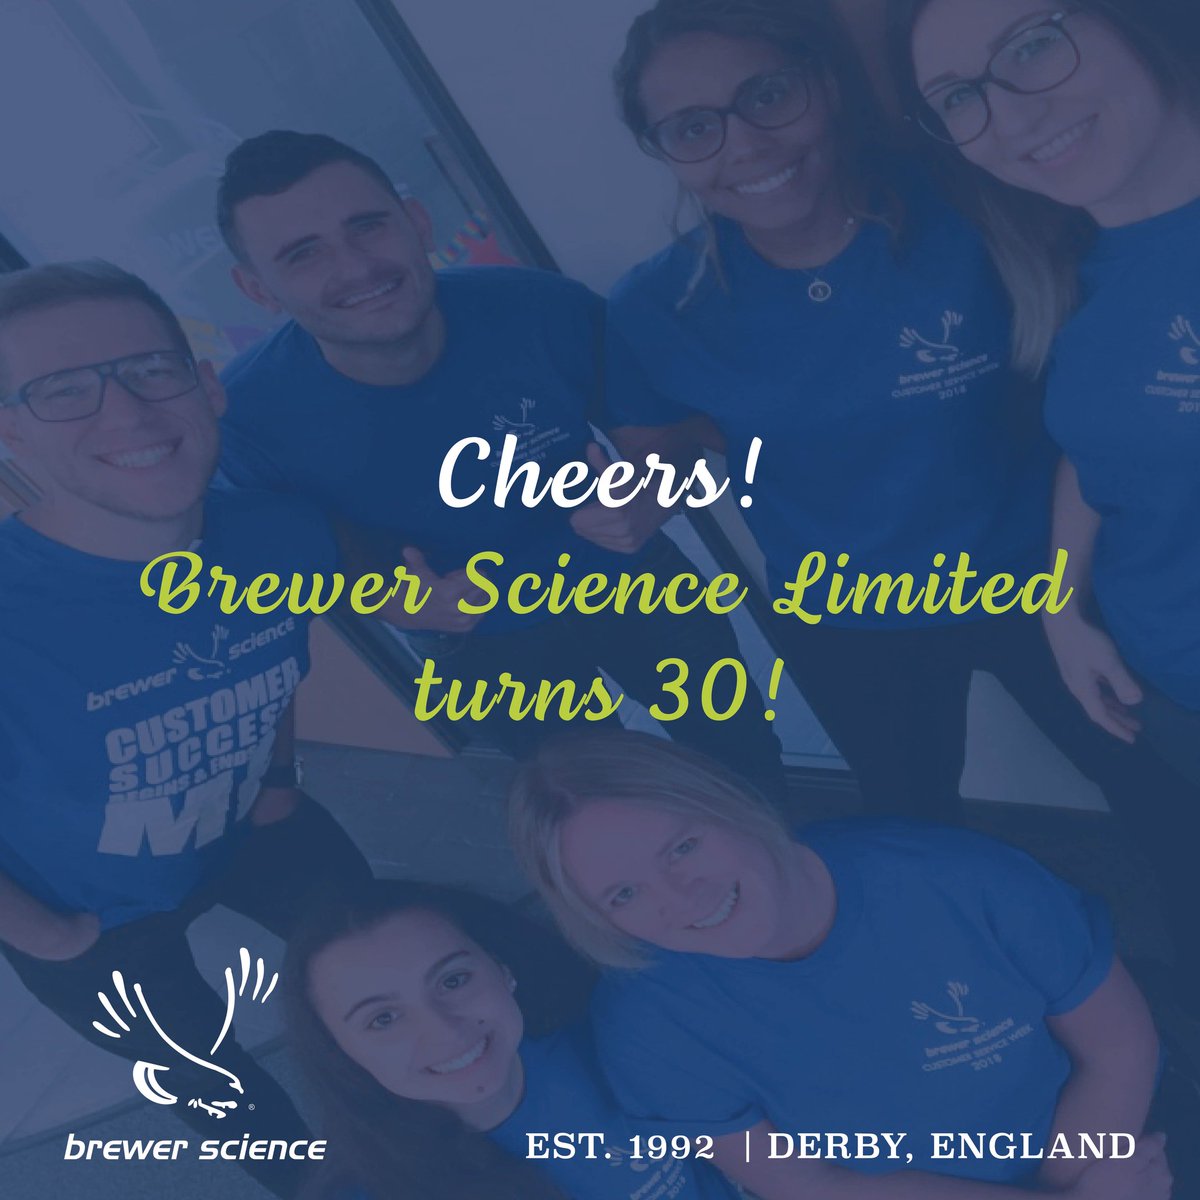 test Twitter Media - Cheers to our United Kingdom Family, Brewer Science Limited, in celebration of 30 years since its establishment! Exactly 30 years ago, to this date, we opened the doors to our Darley Abbey Mills office in Derby, England. Happy Anniversary, BSL! https://t.co/5oAhfUzpy1